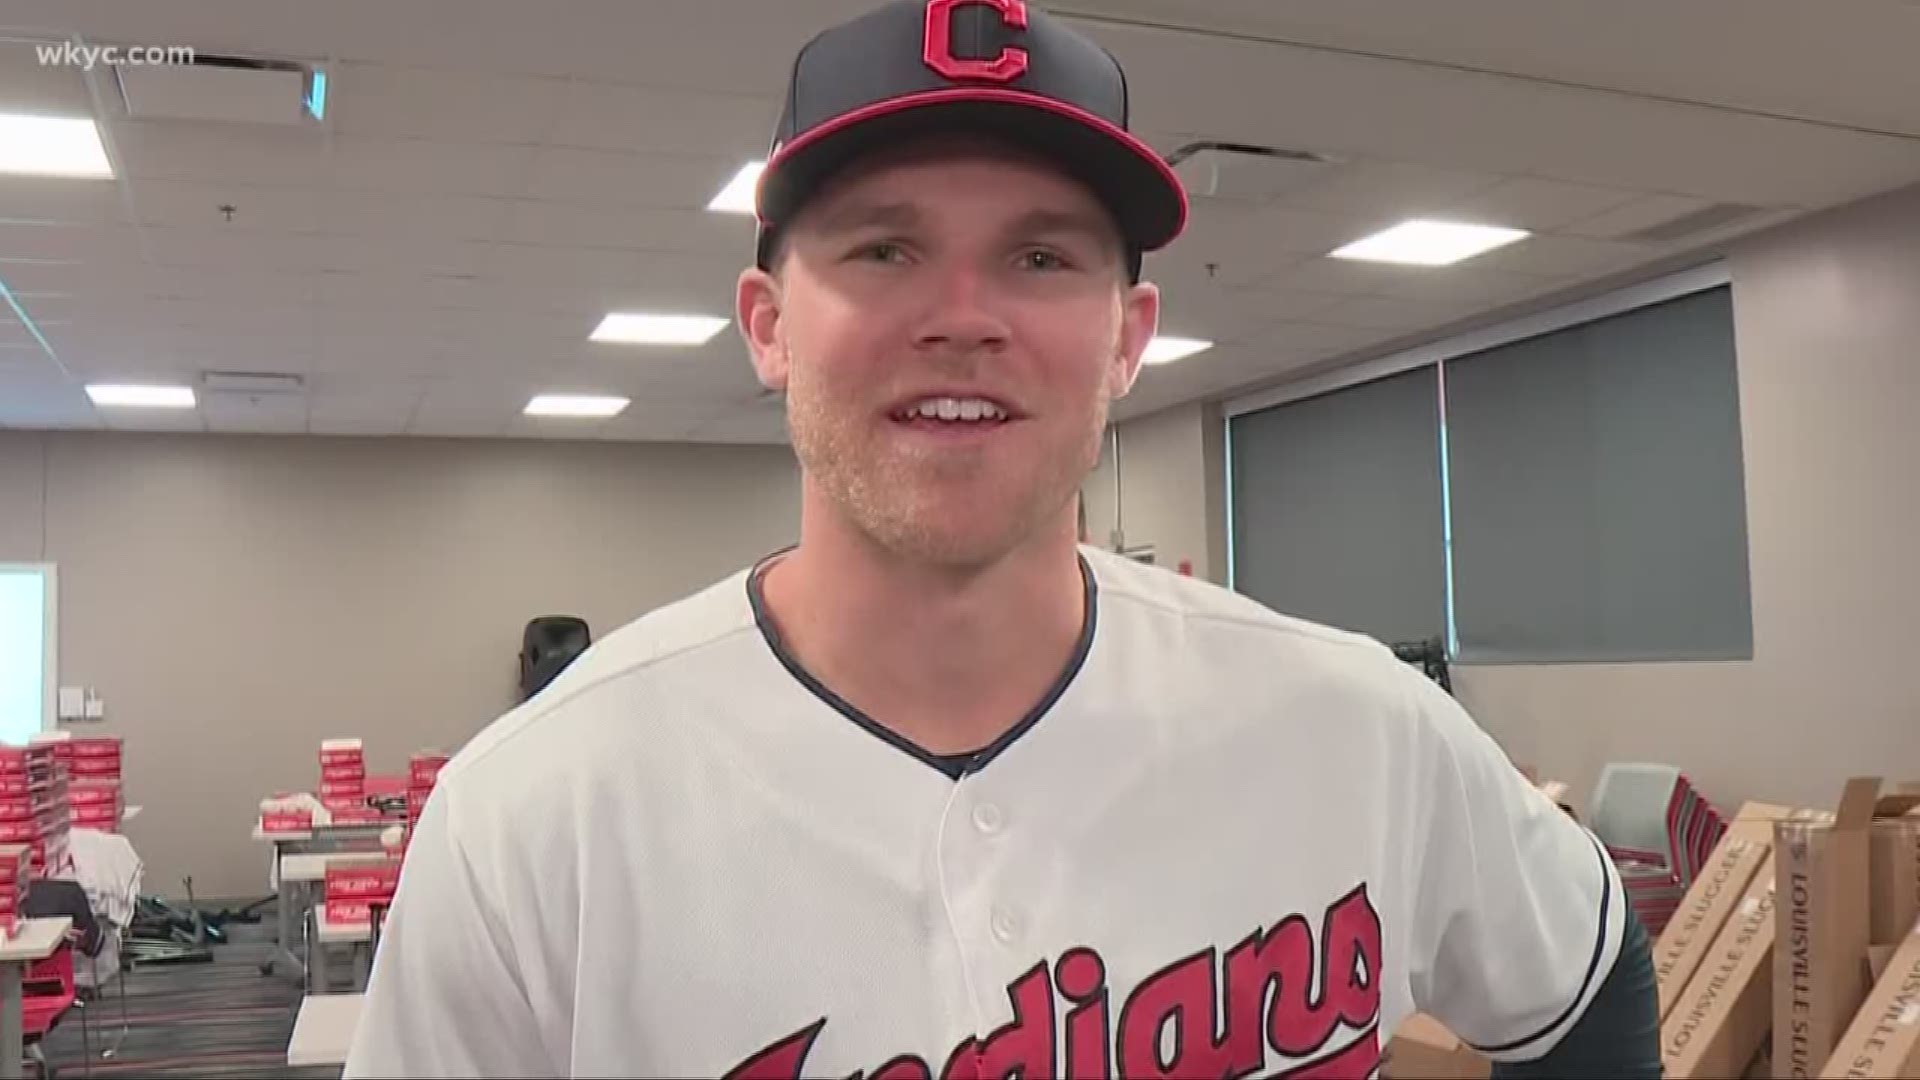 First baseman Jake Bauers had some fun at his first Indians media day.